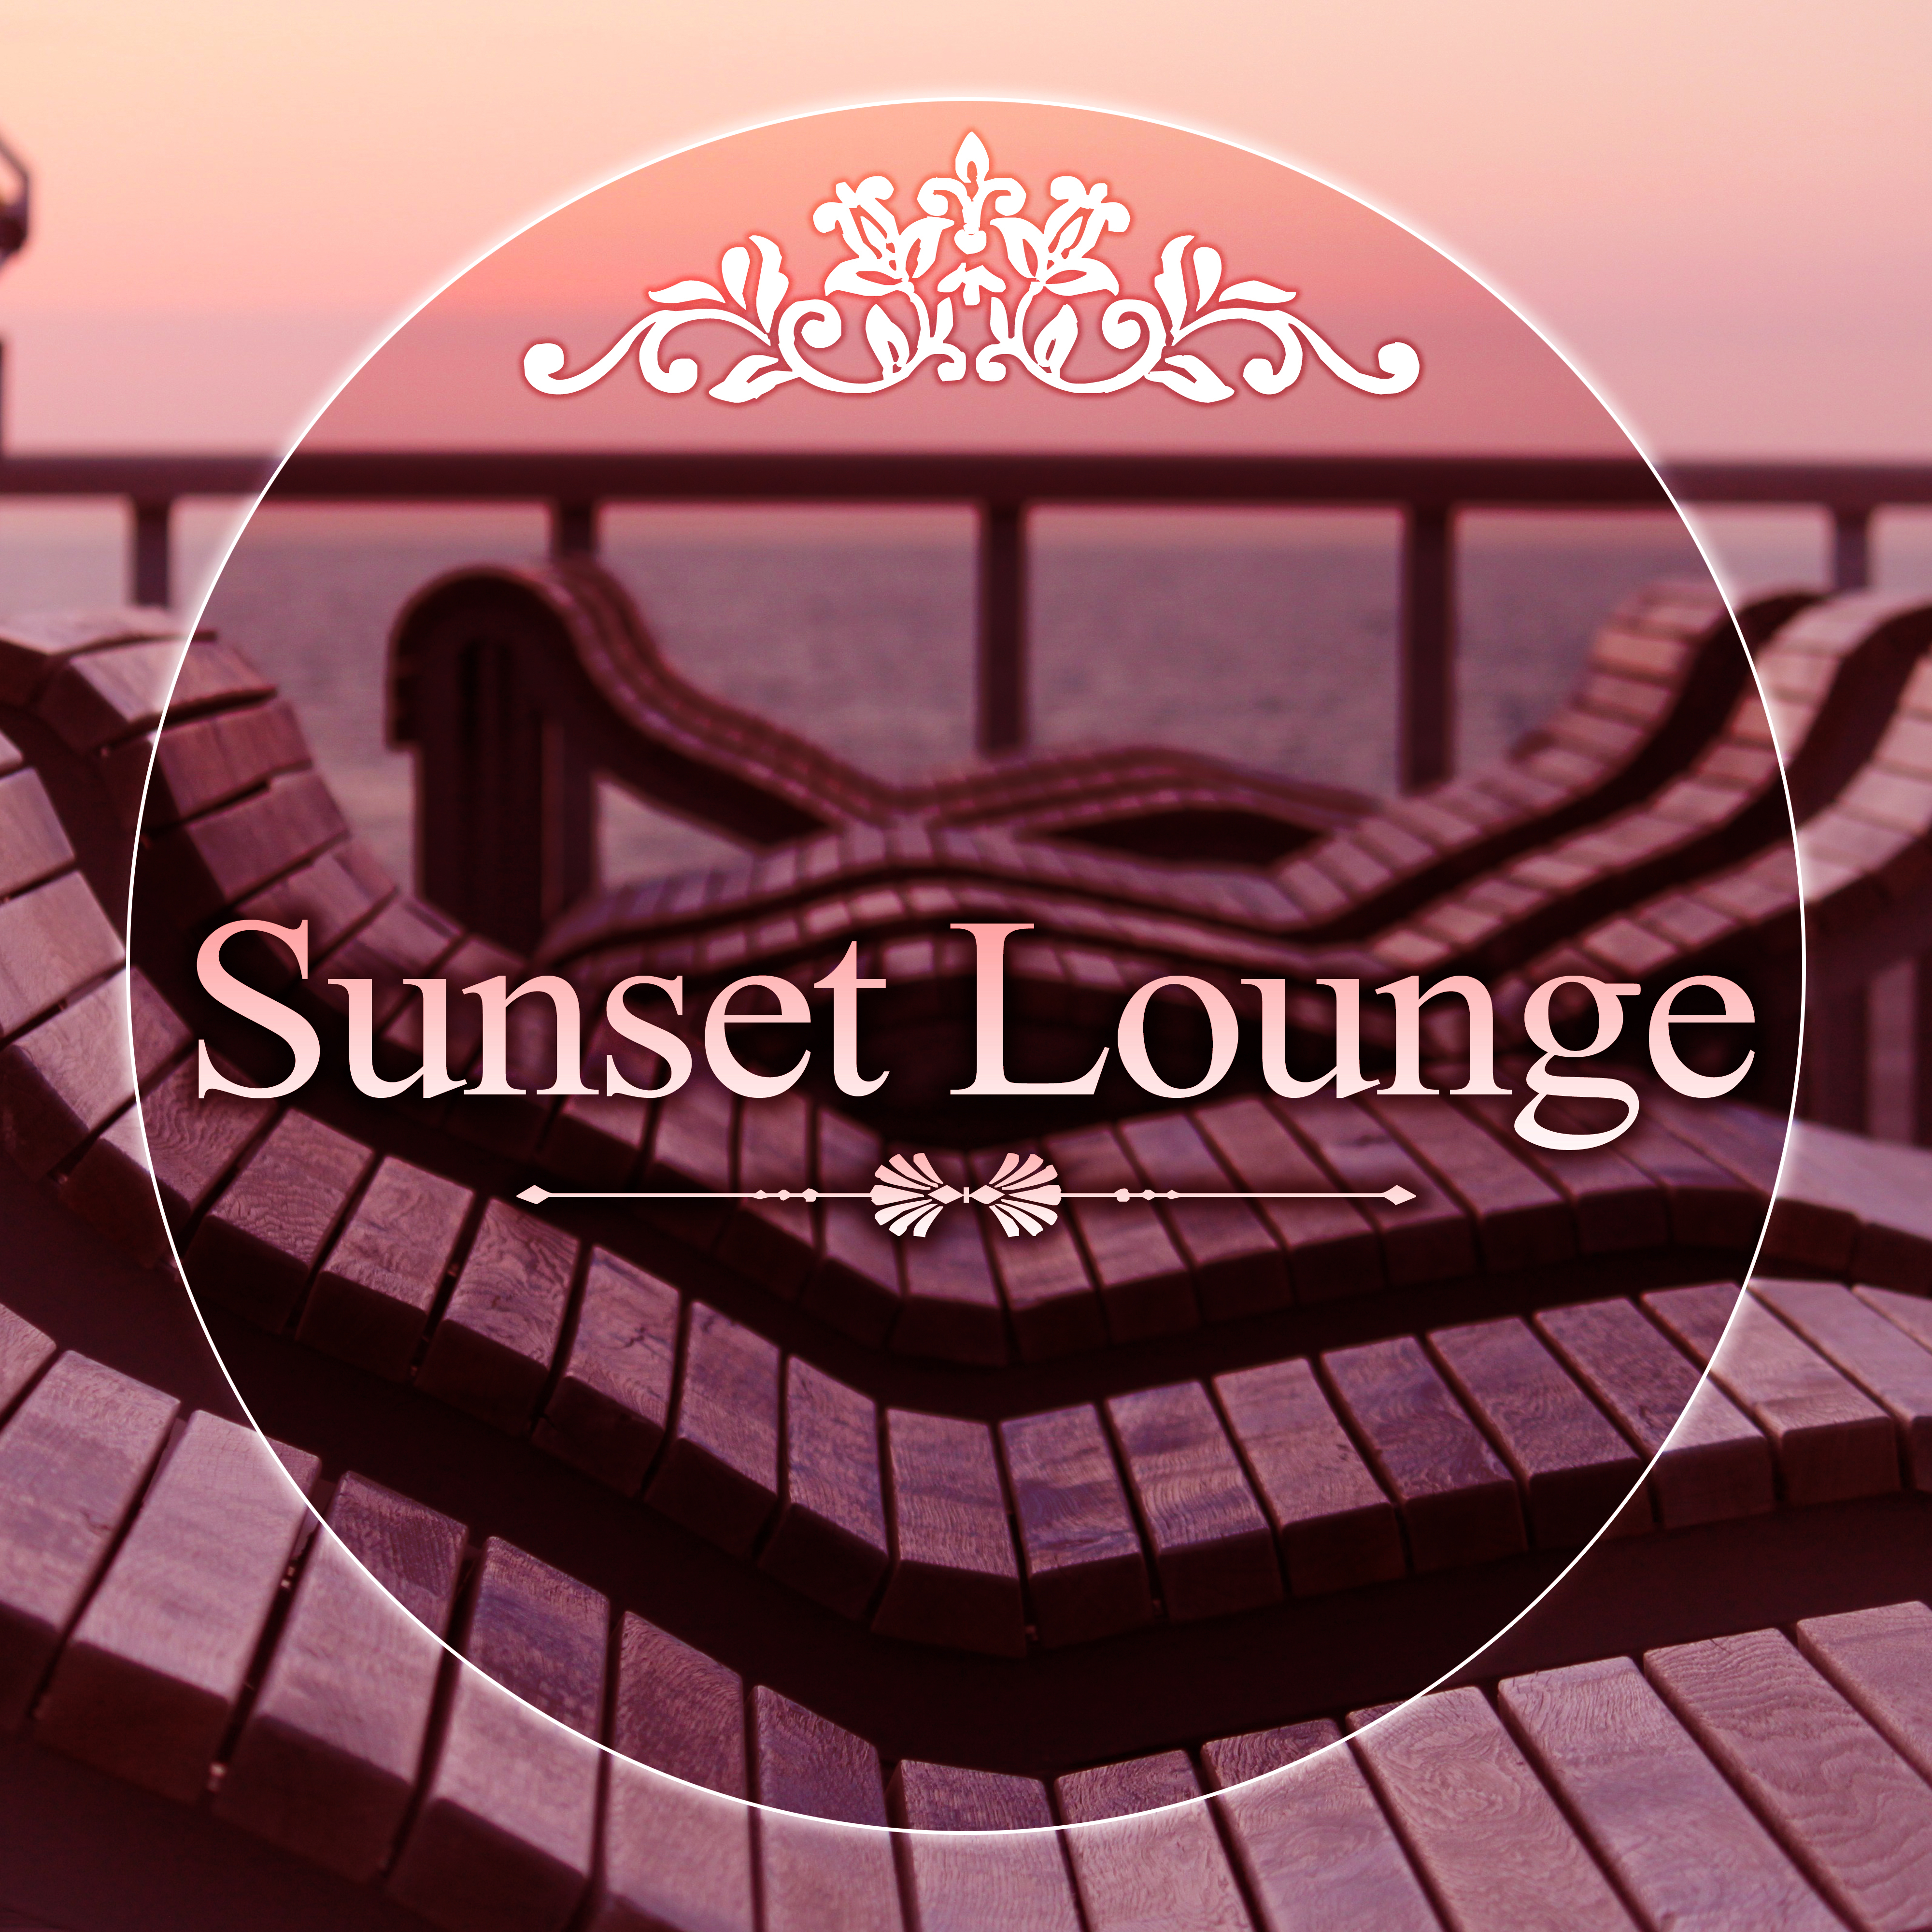 Sunset Lounge - Holiday Chill Out, Relaxing Chill Out Music, The Best Chill Lounge Music